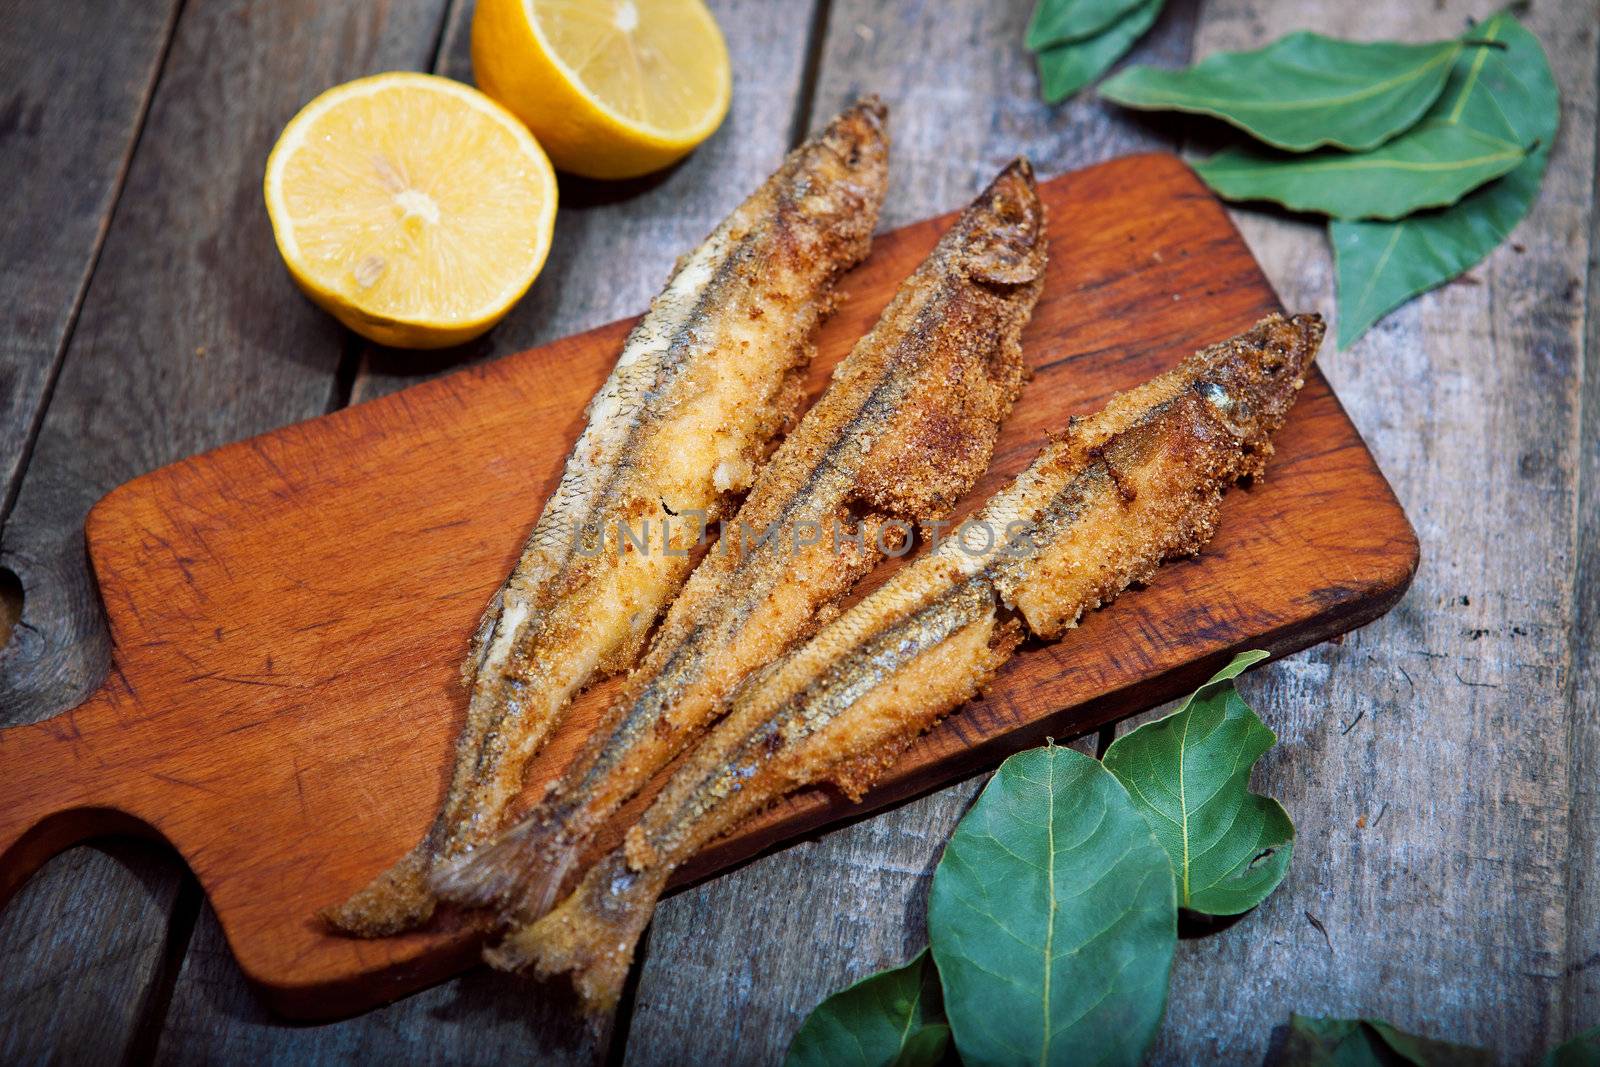 Baked fish with lemon on a wooden table